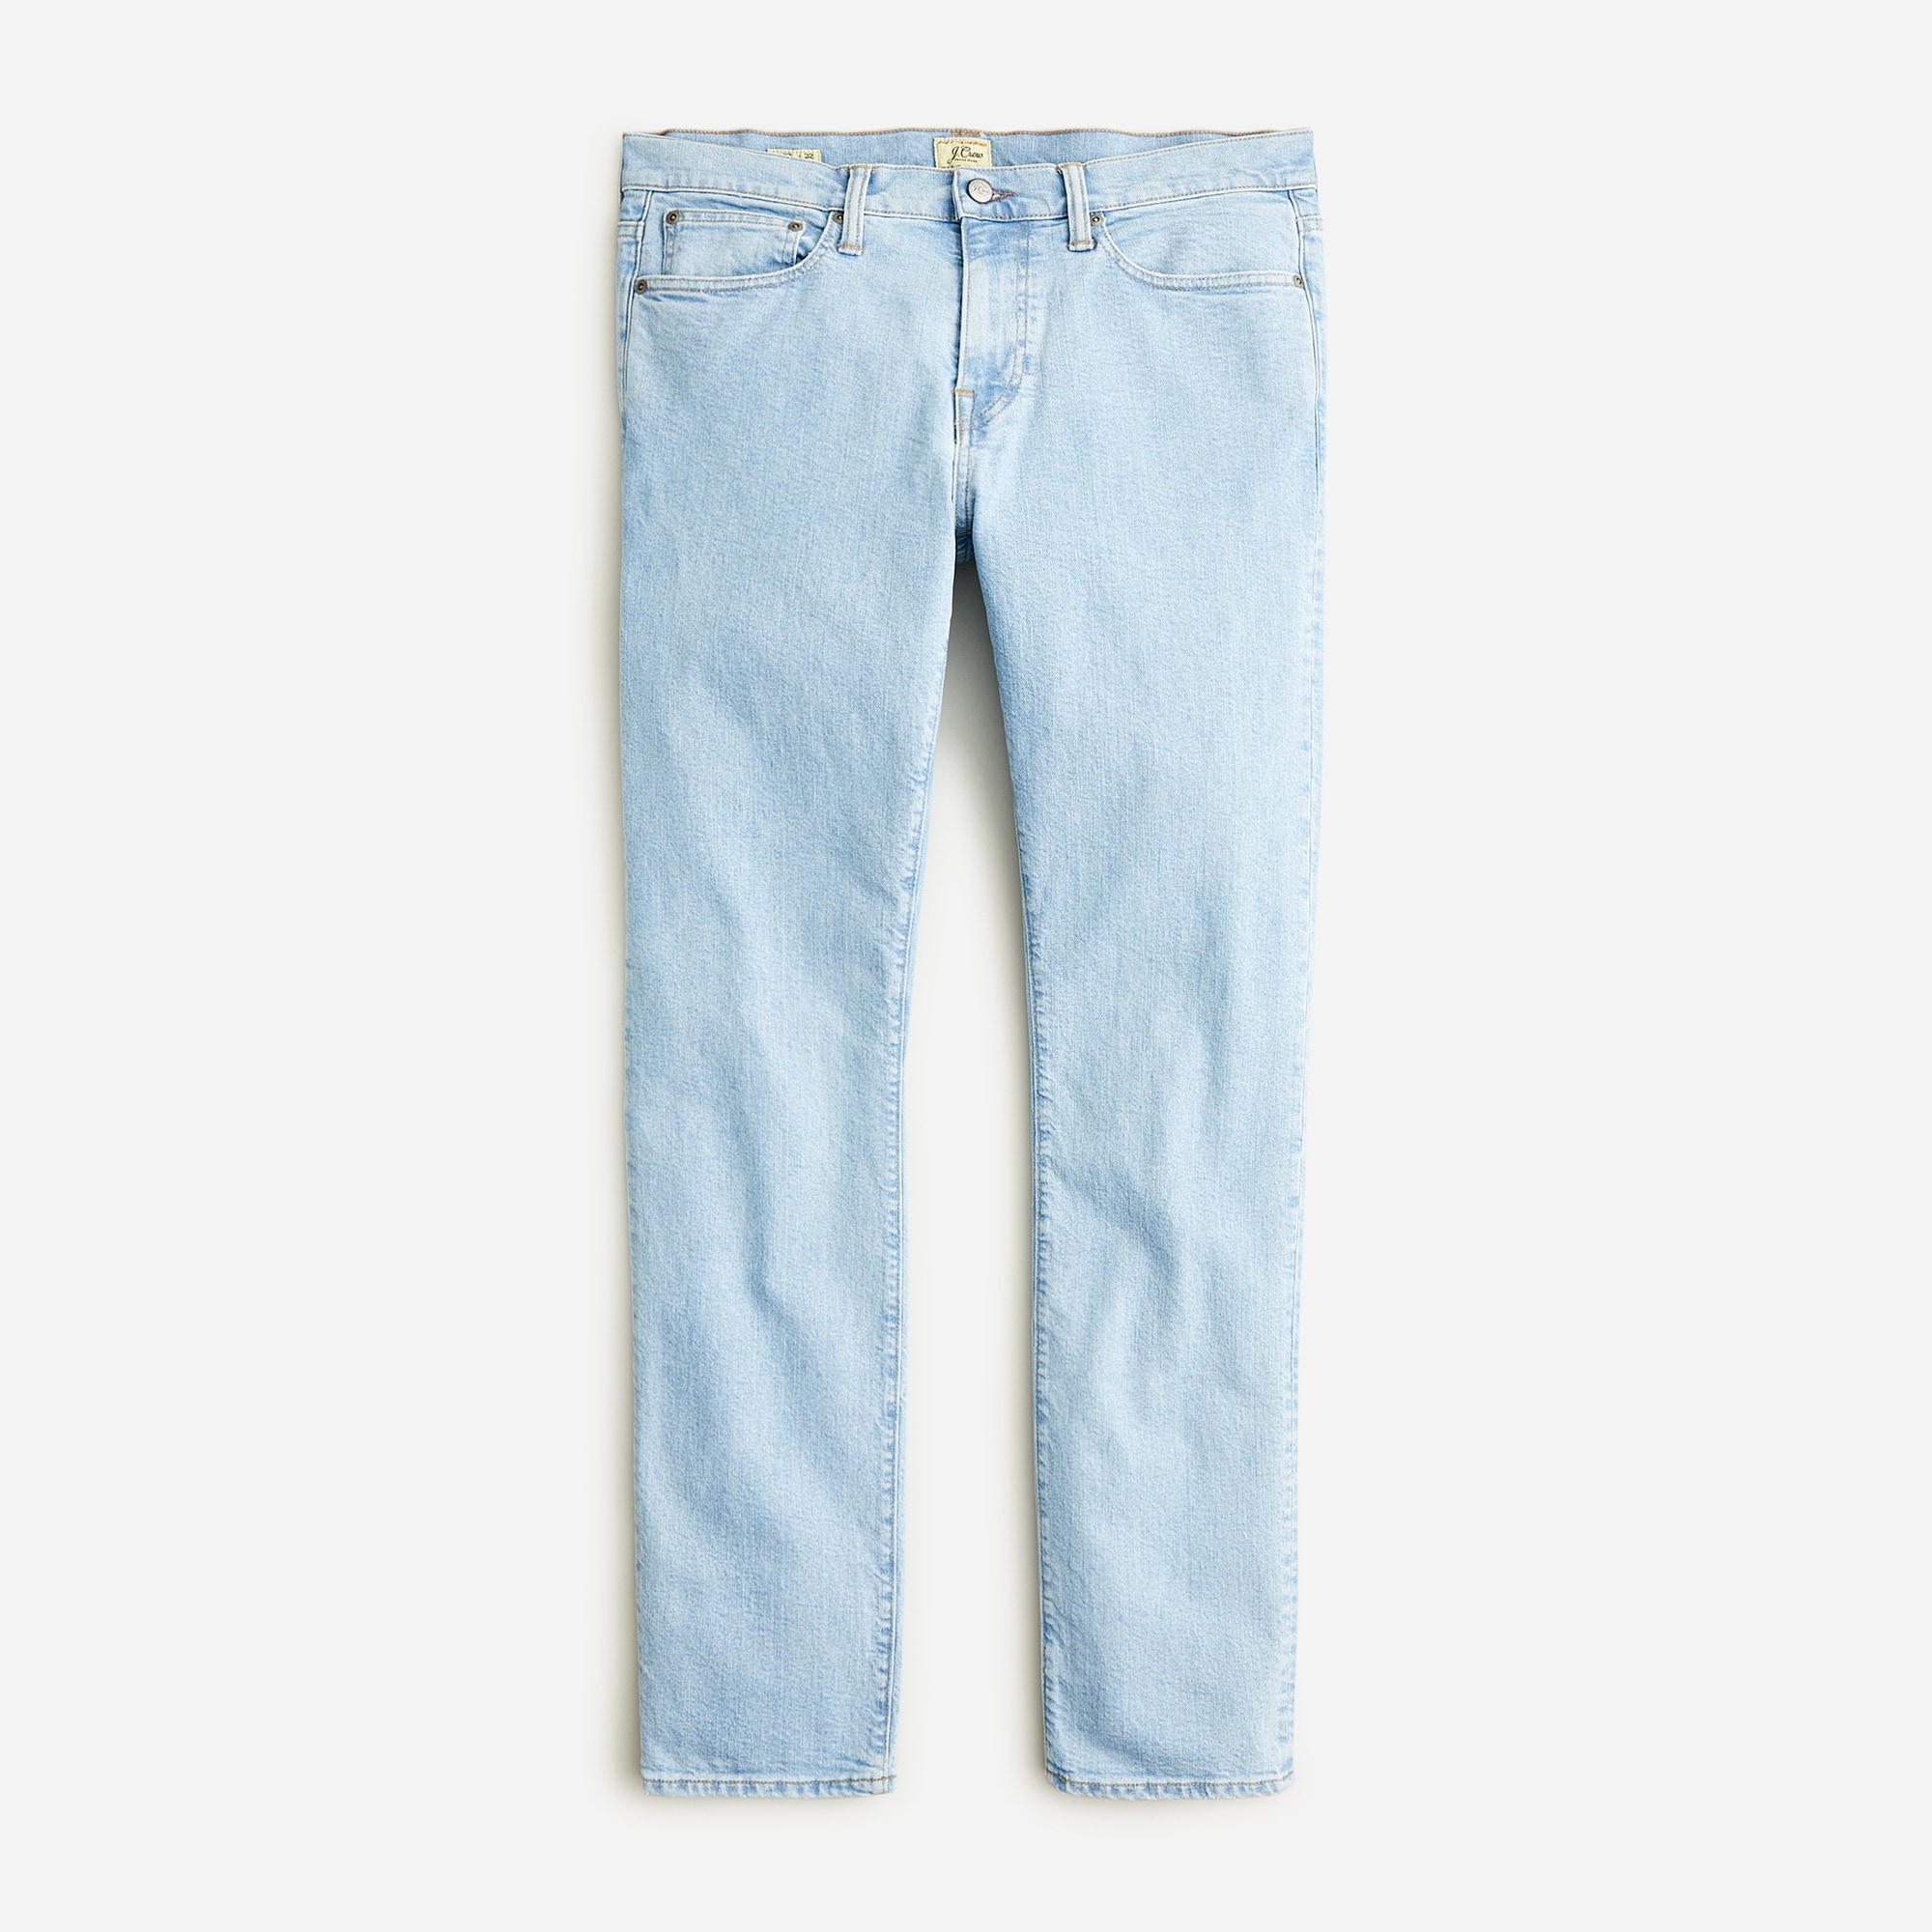  484 Slim-fit stretch jean in seven-year wash